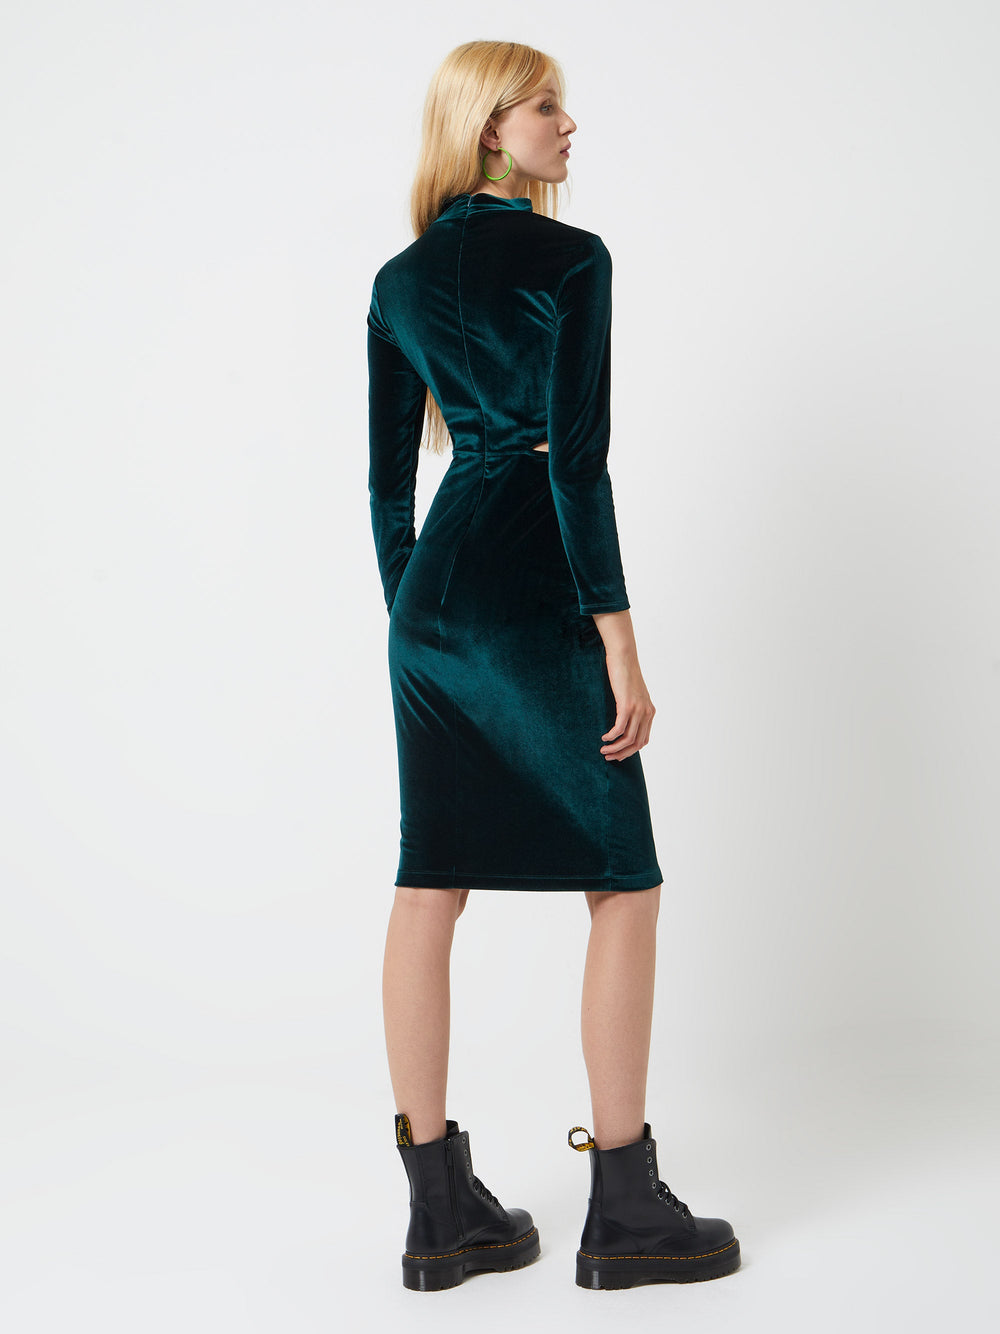 Sula Velvet Jersey Cut Dress Out French EU Connection 